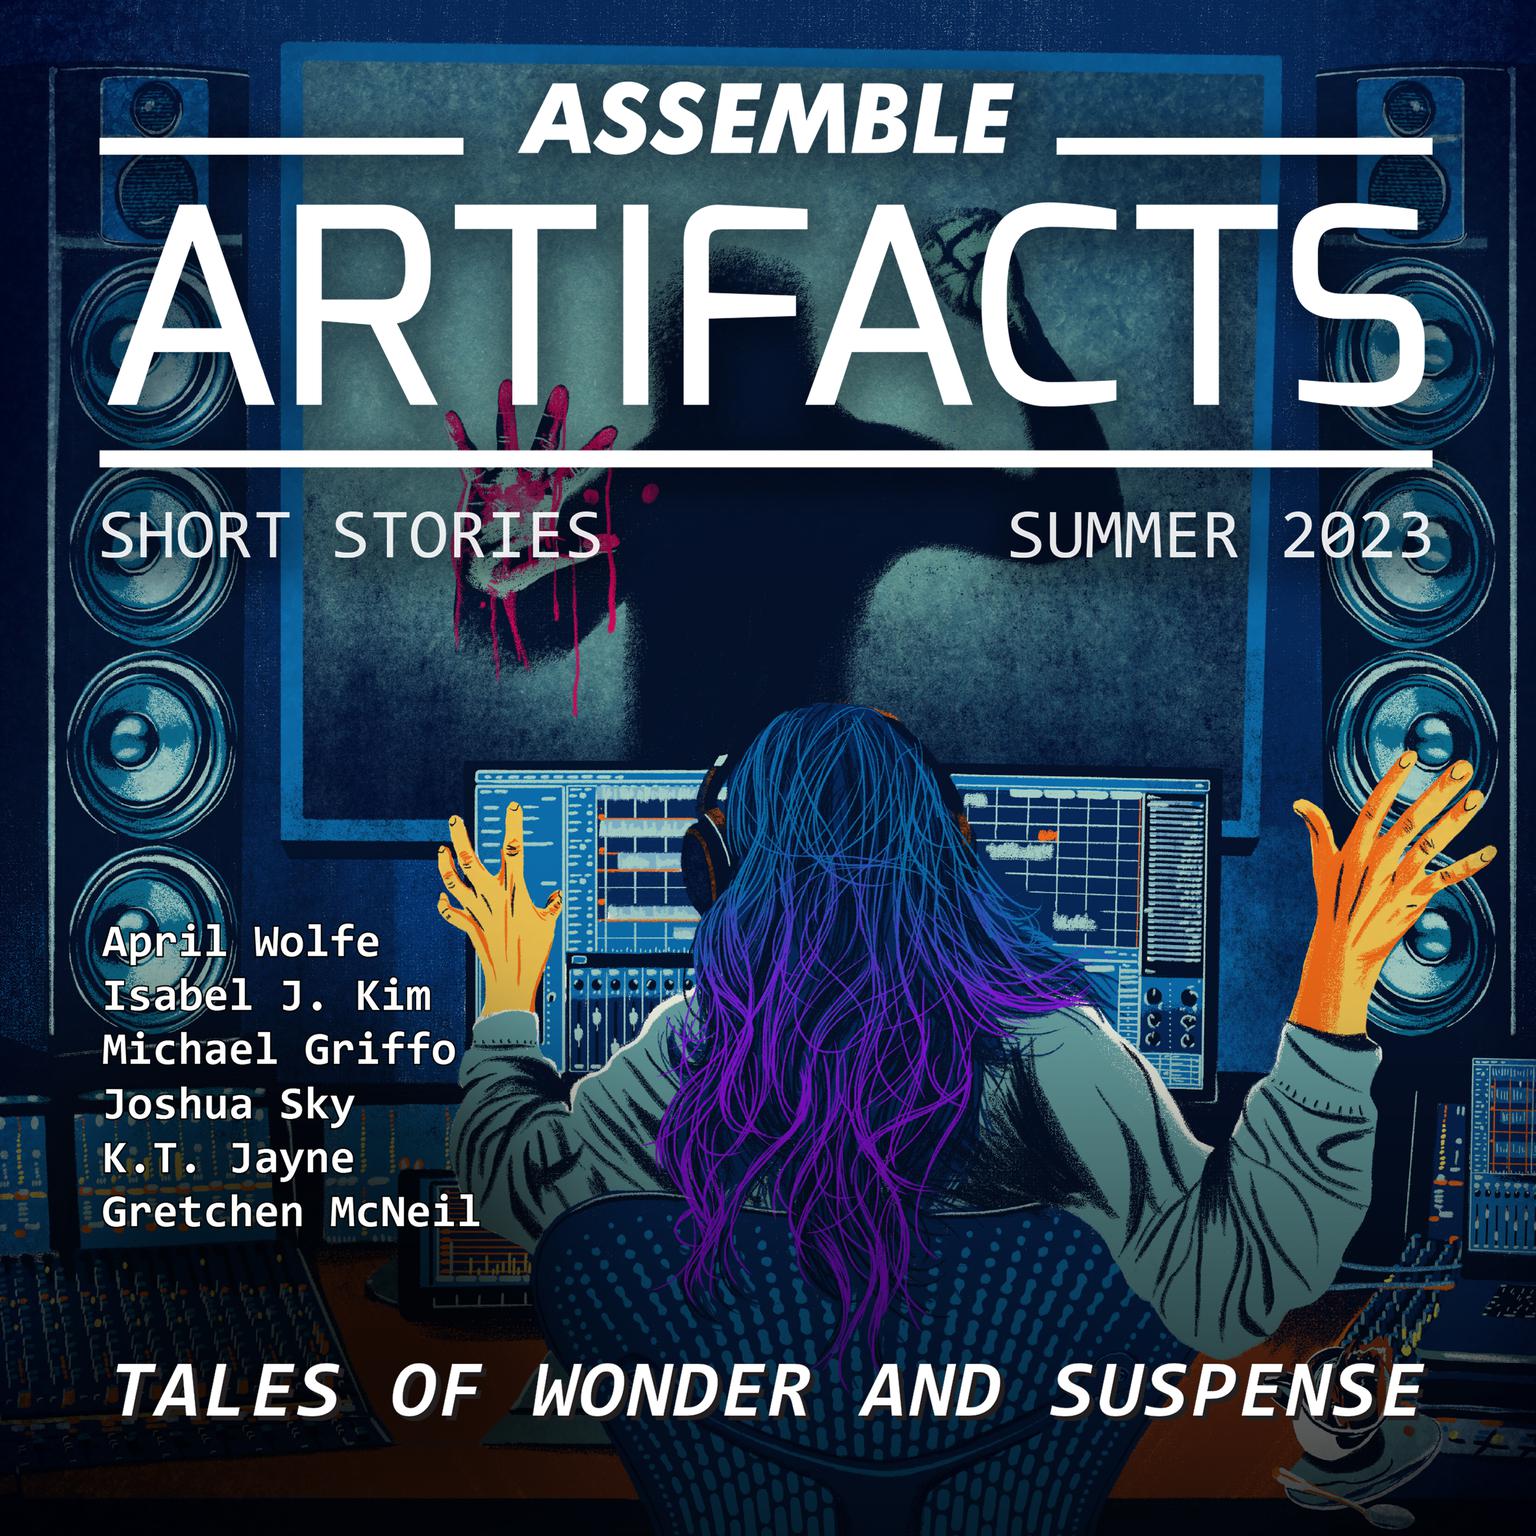 Assemble Artifacts Short Story Magazine: Summer 2023 (Issue #4) Audiobook, by various authors